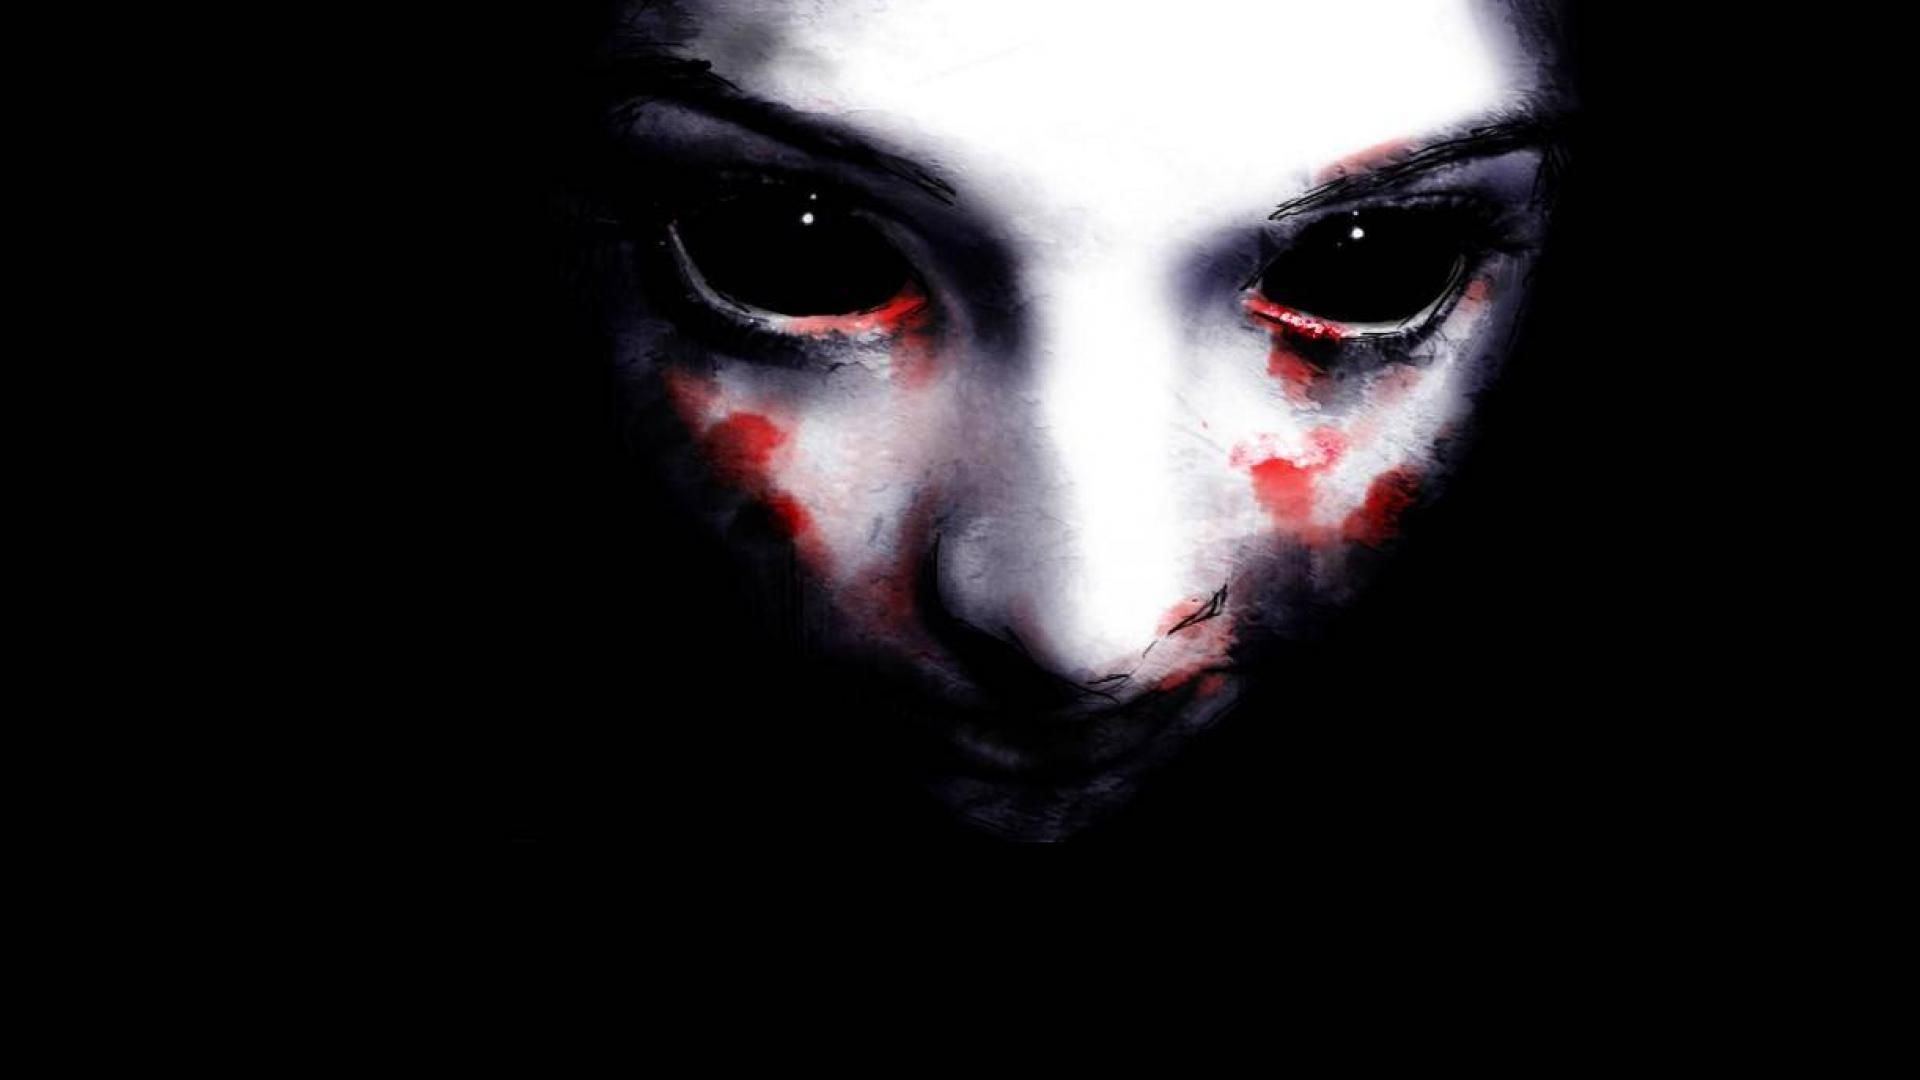 Download Free Horror And Scary Wallpaper x wallpaper. Scary wallpaper, Scary, Horror